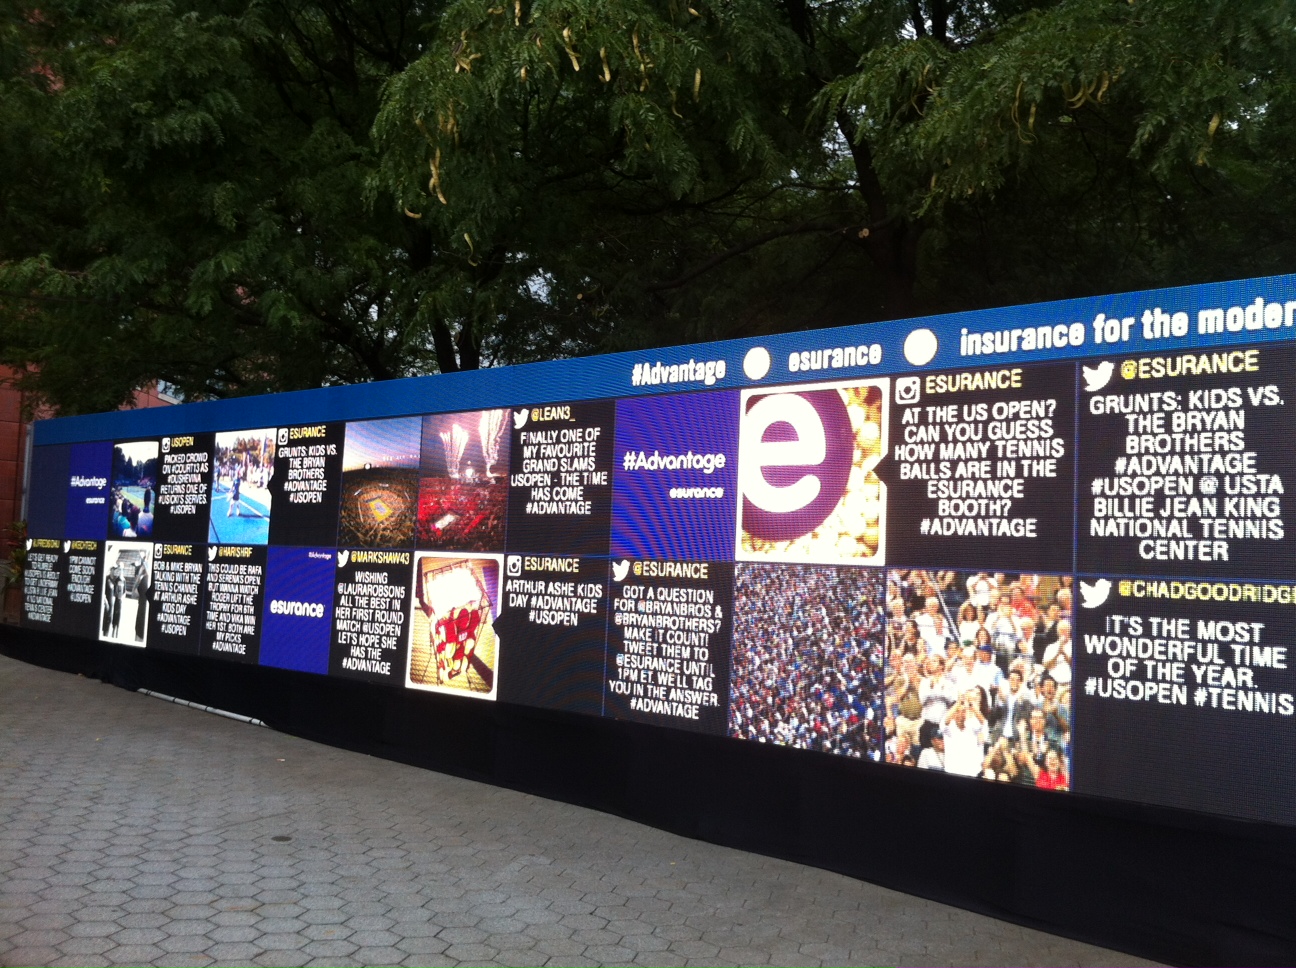 The "Social Wall" at the US Open.